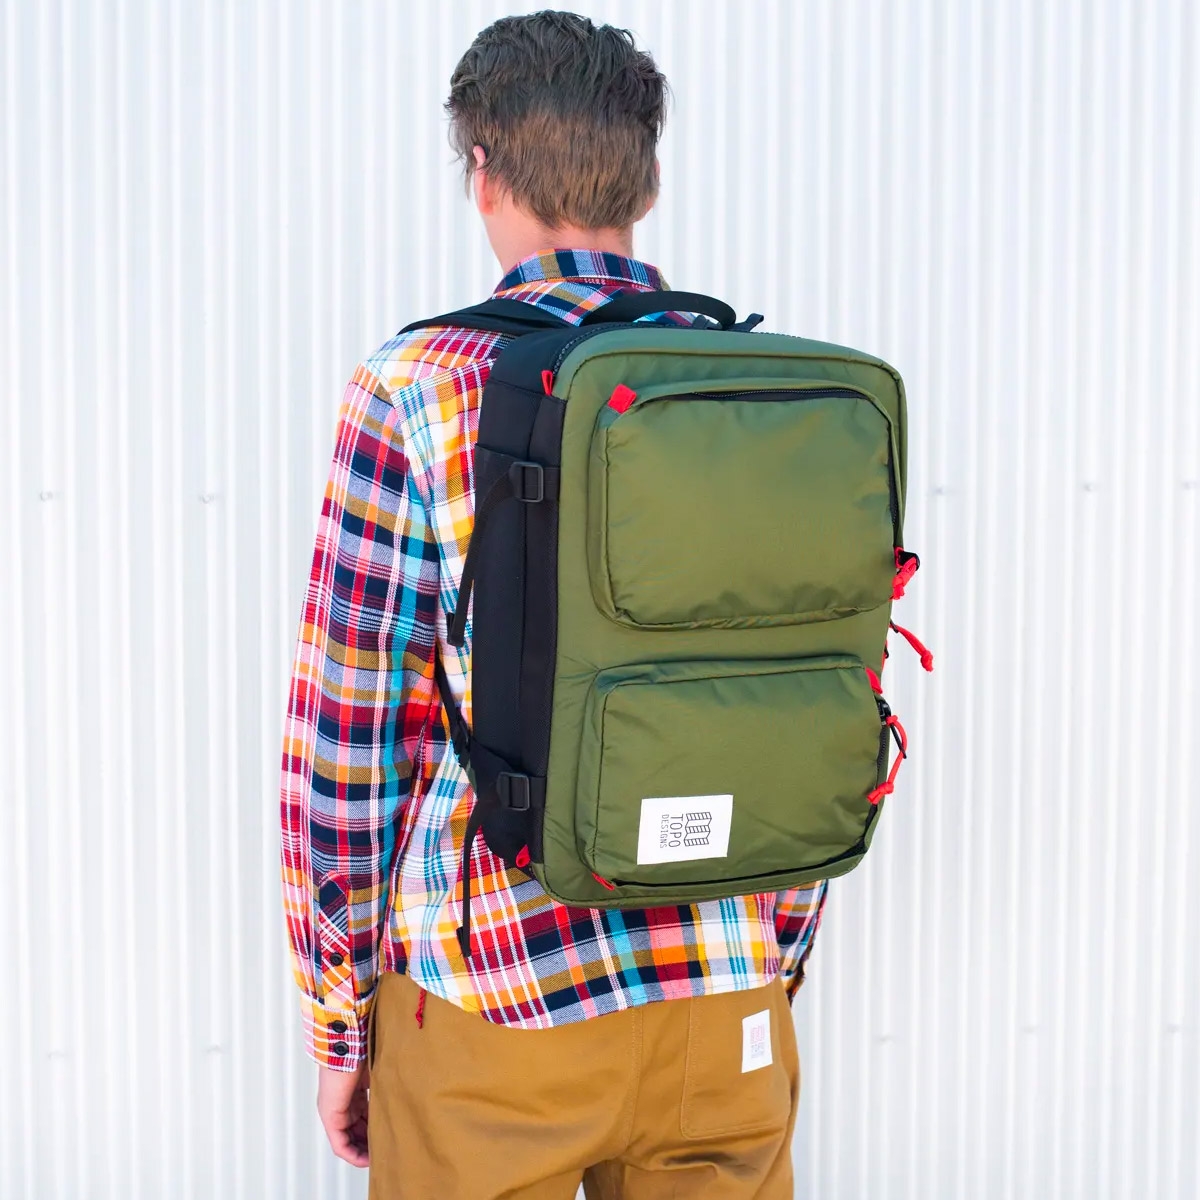 Topo Designs Global Briefcase 3-day, the perfect bag for everyday carry or 3-day weekends 